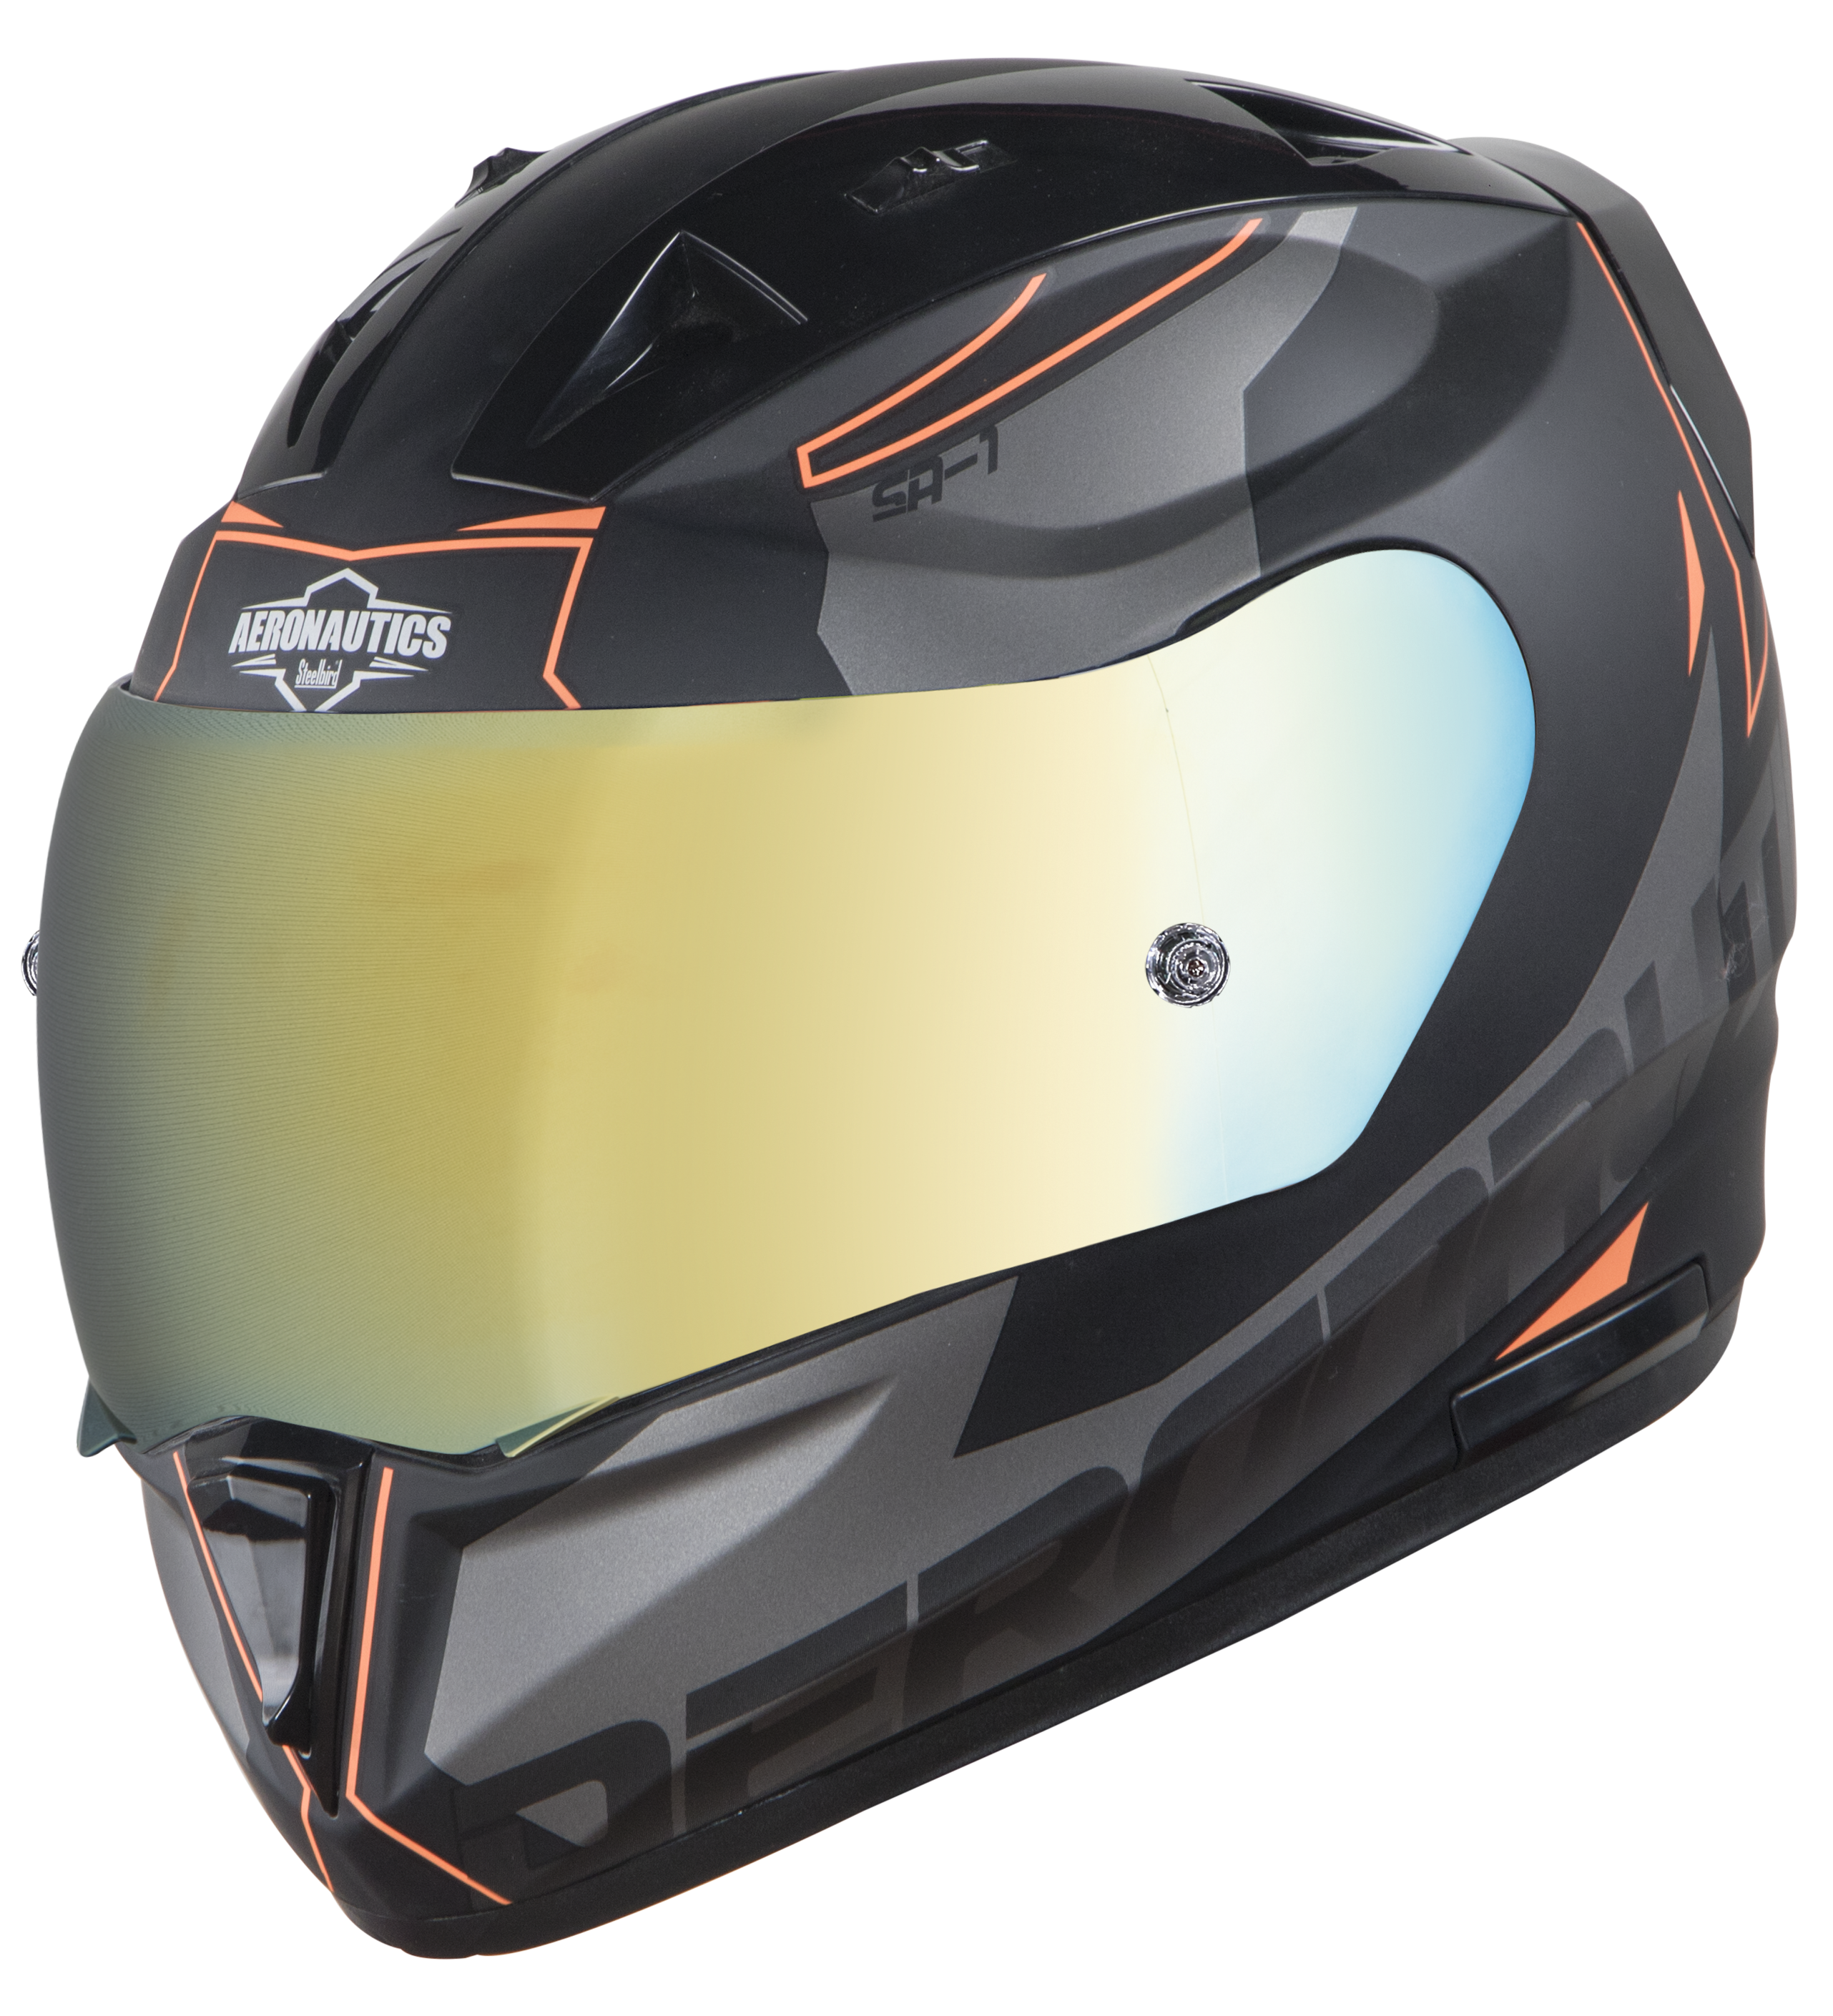 SA-1 RTW Mat Black/Orange With Anti-Fog Shield Gold Chrome Visor(Fitted With Clear Visor Extra Gold Chrome Anti-Fog Shield Visor Free)